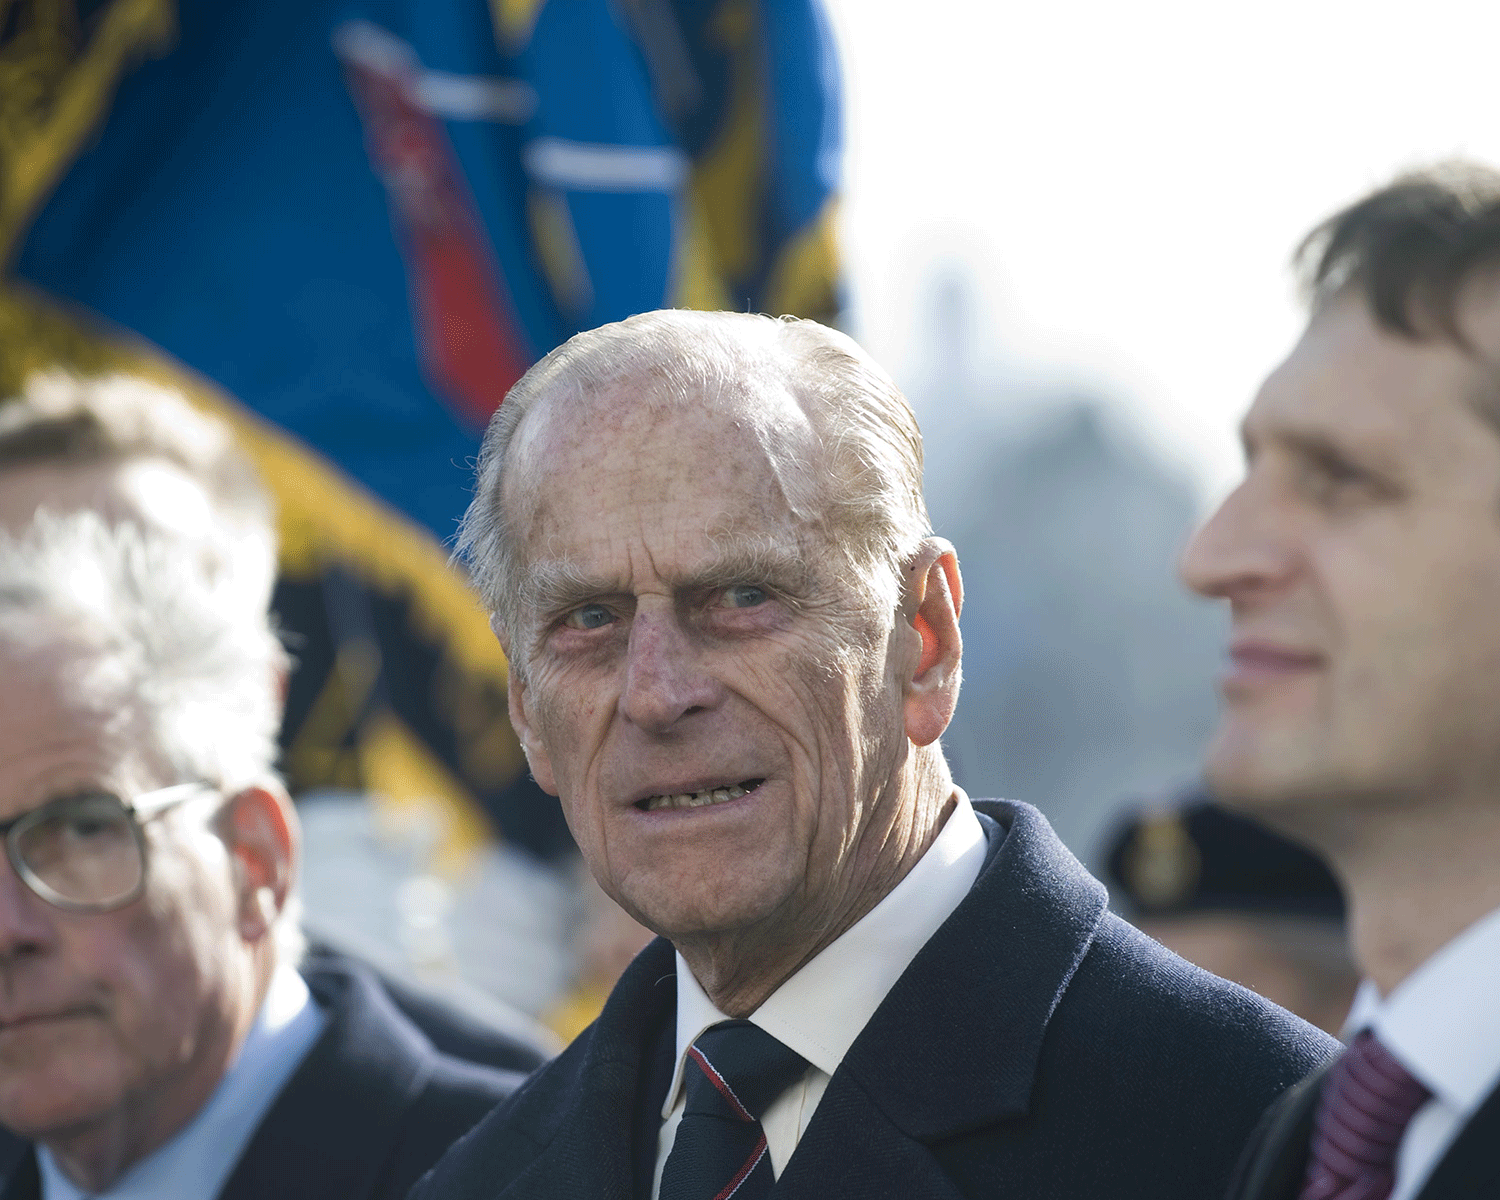 Prince Phillip has also had a blocked artery and urinary infection over the past few years